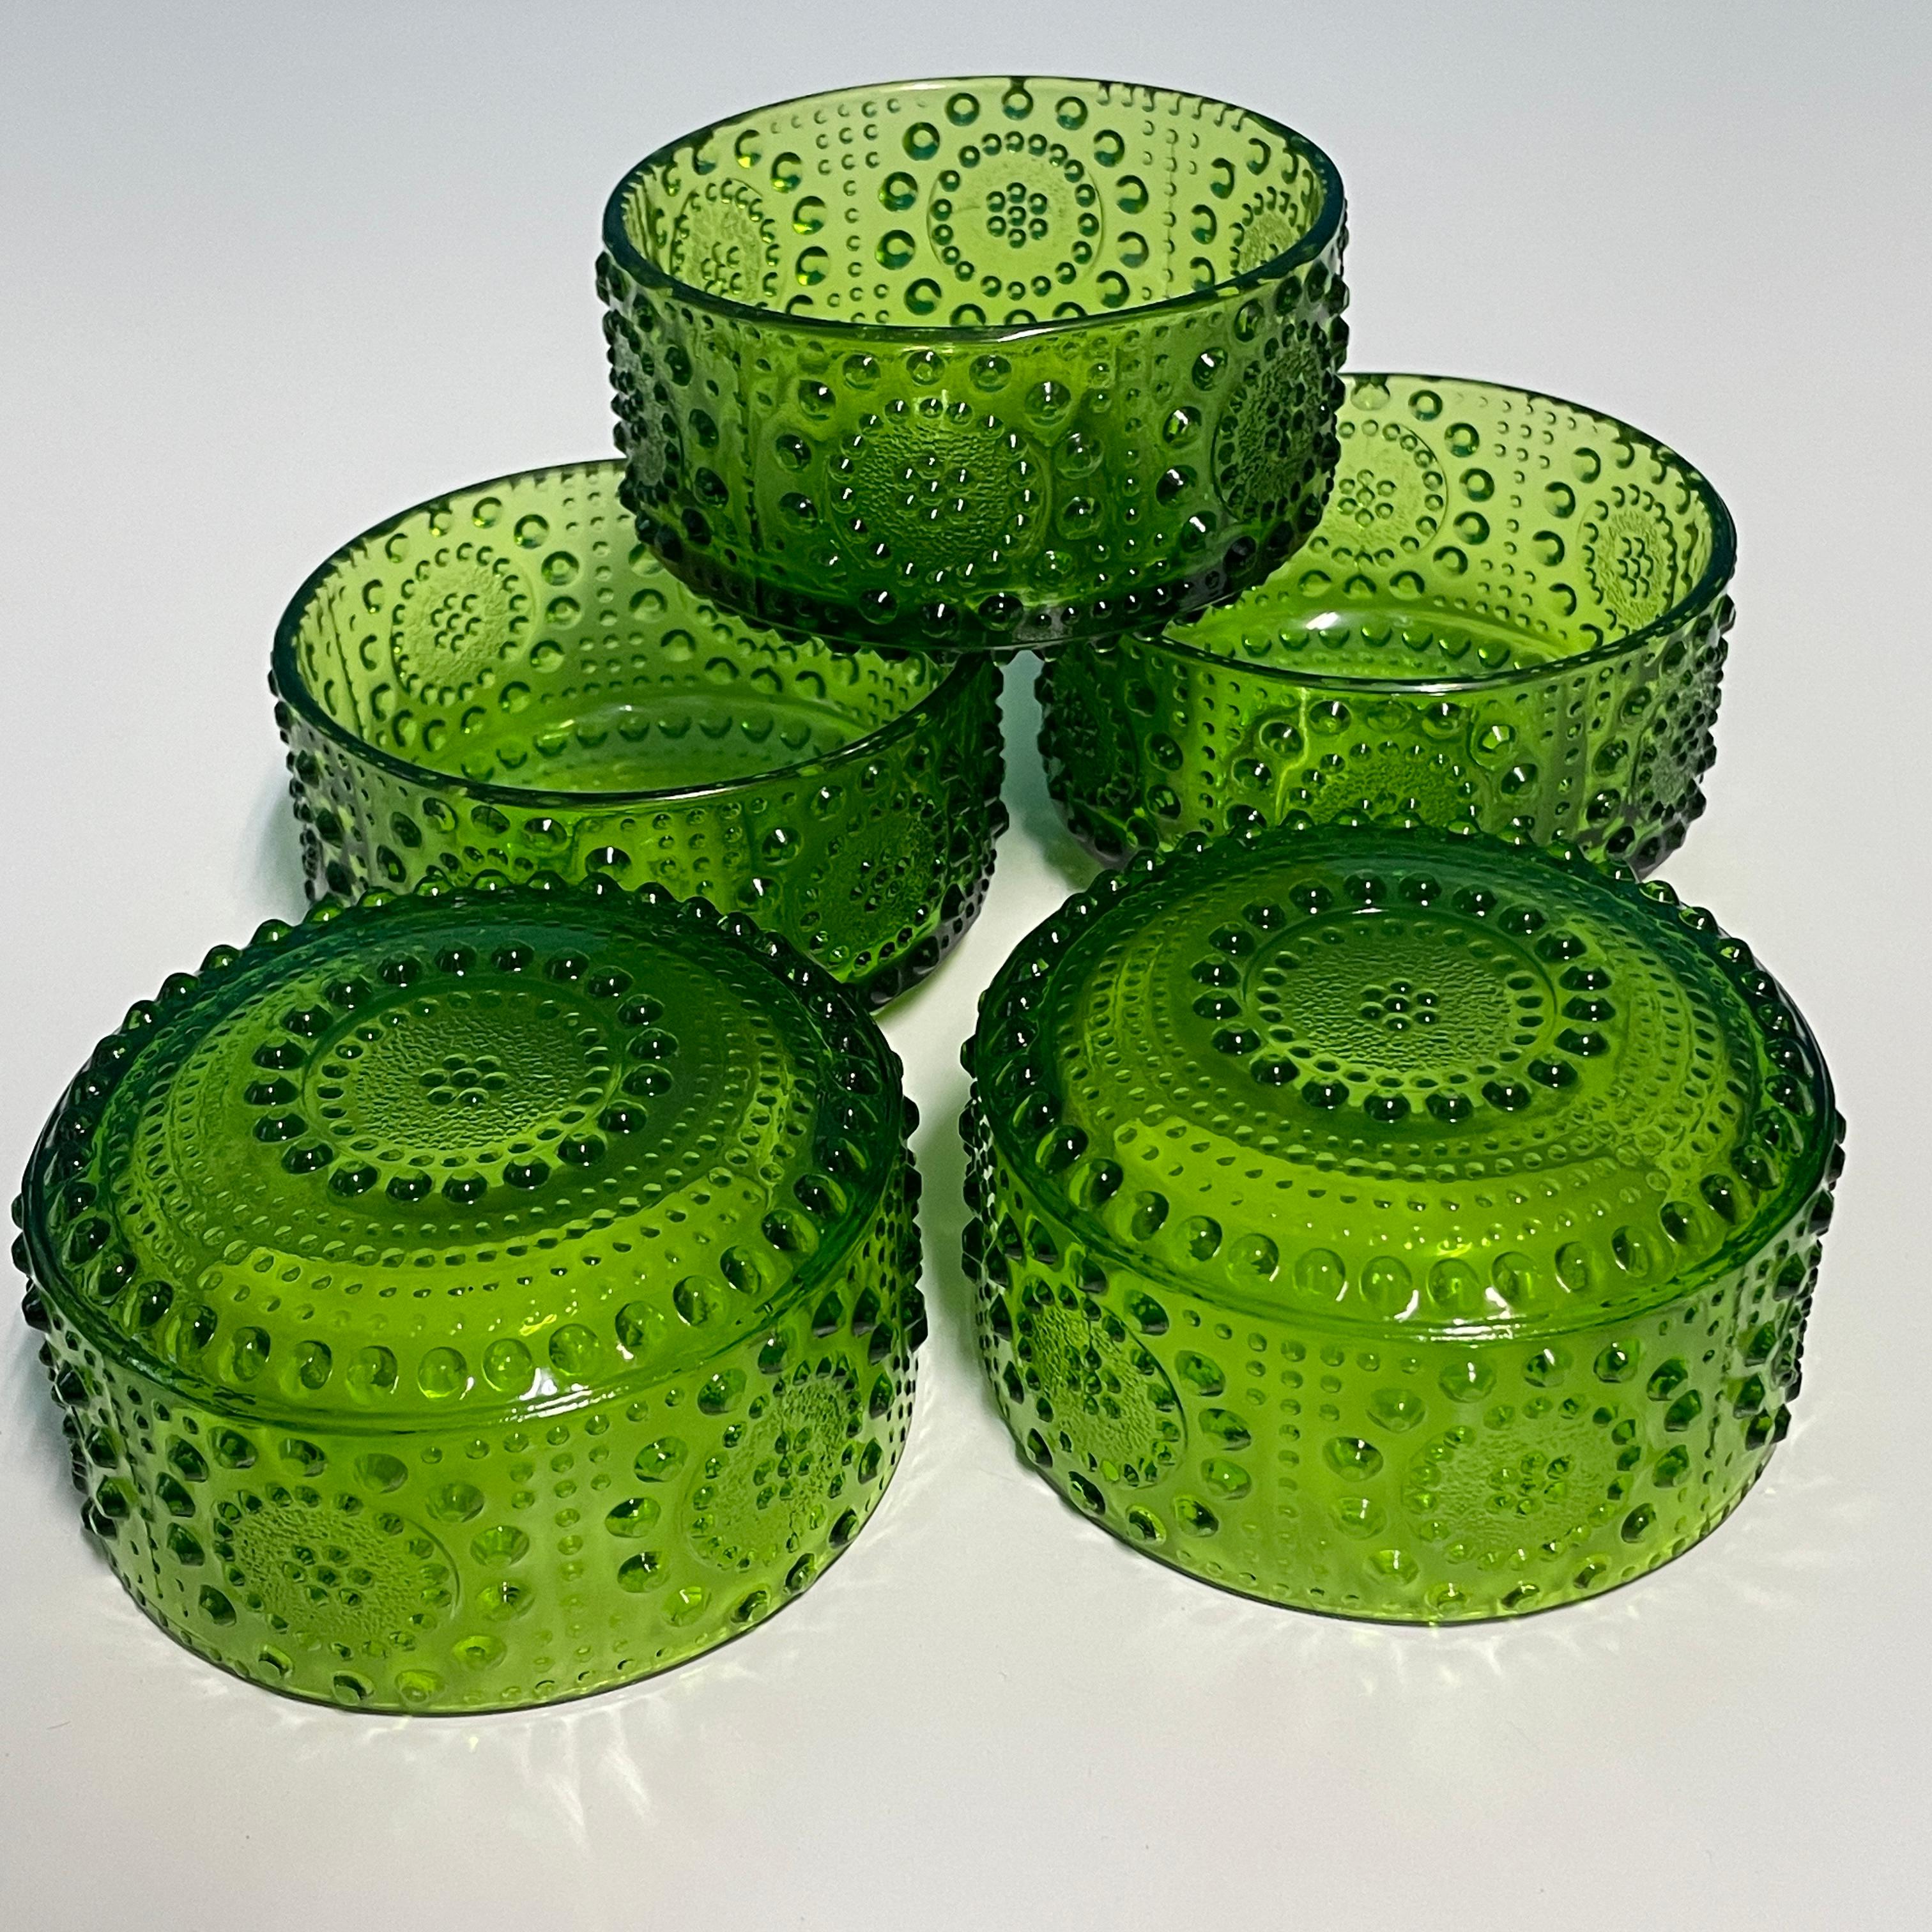 Glass 1960's Dessert Bowls Designed by Nanny Still - Made in Finland. Set of 5pcs For Sale